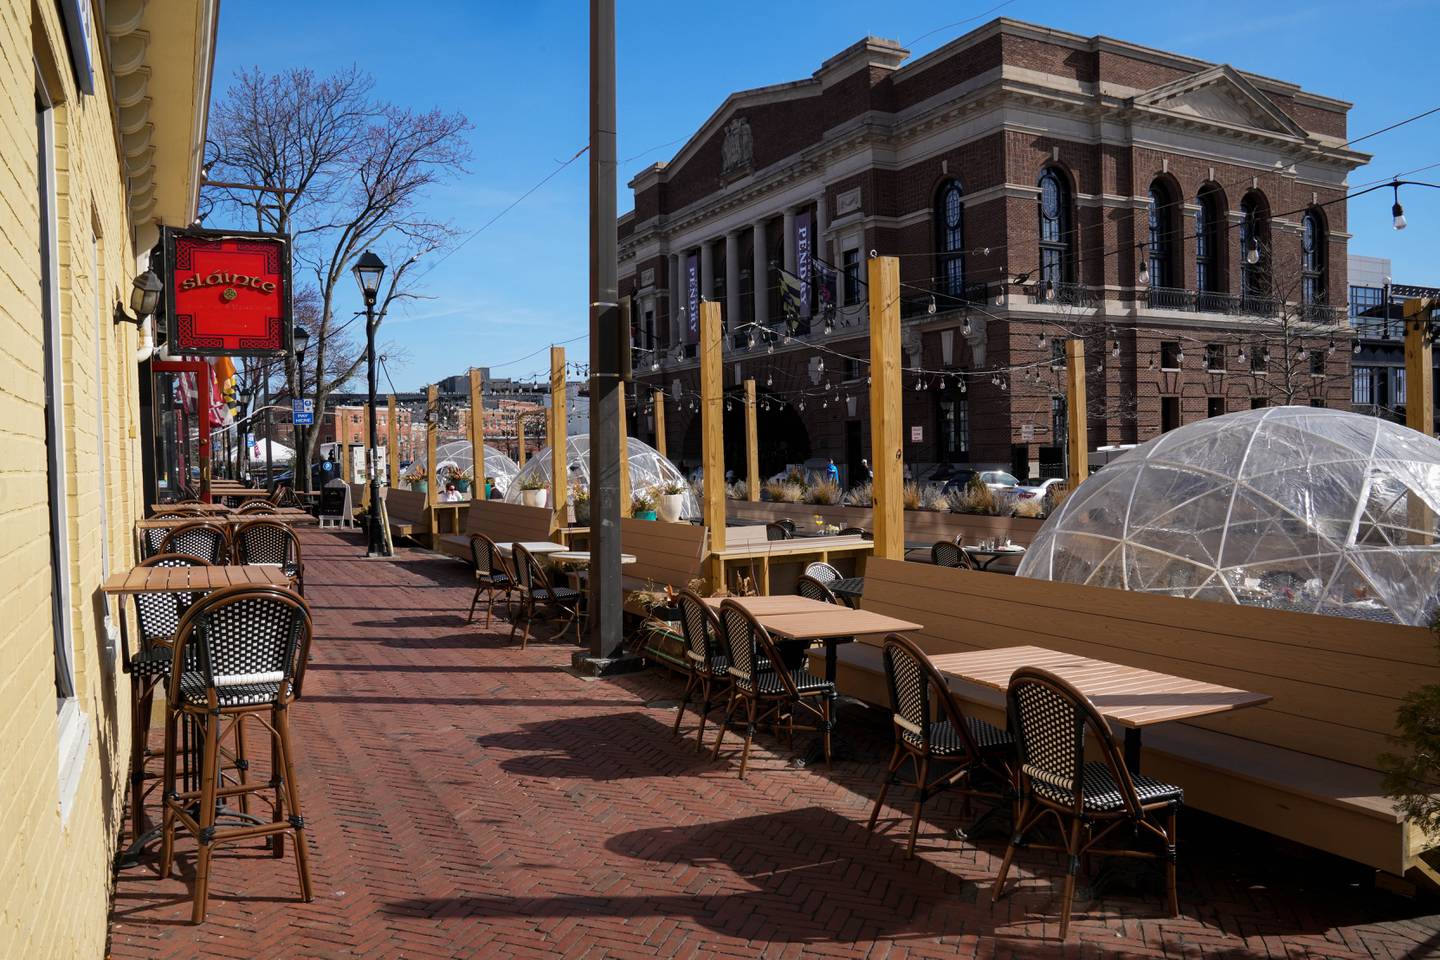 Restaurants like Sláinte along Fells Point’s waterfront have set up “parklets” for guests to enjoy outdoor dining.